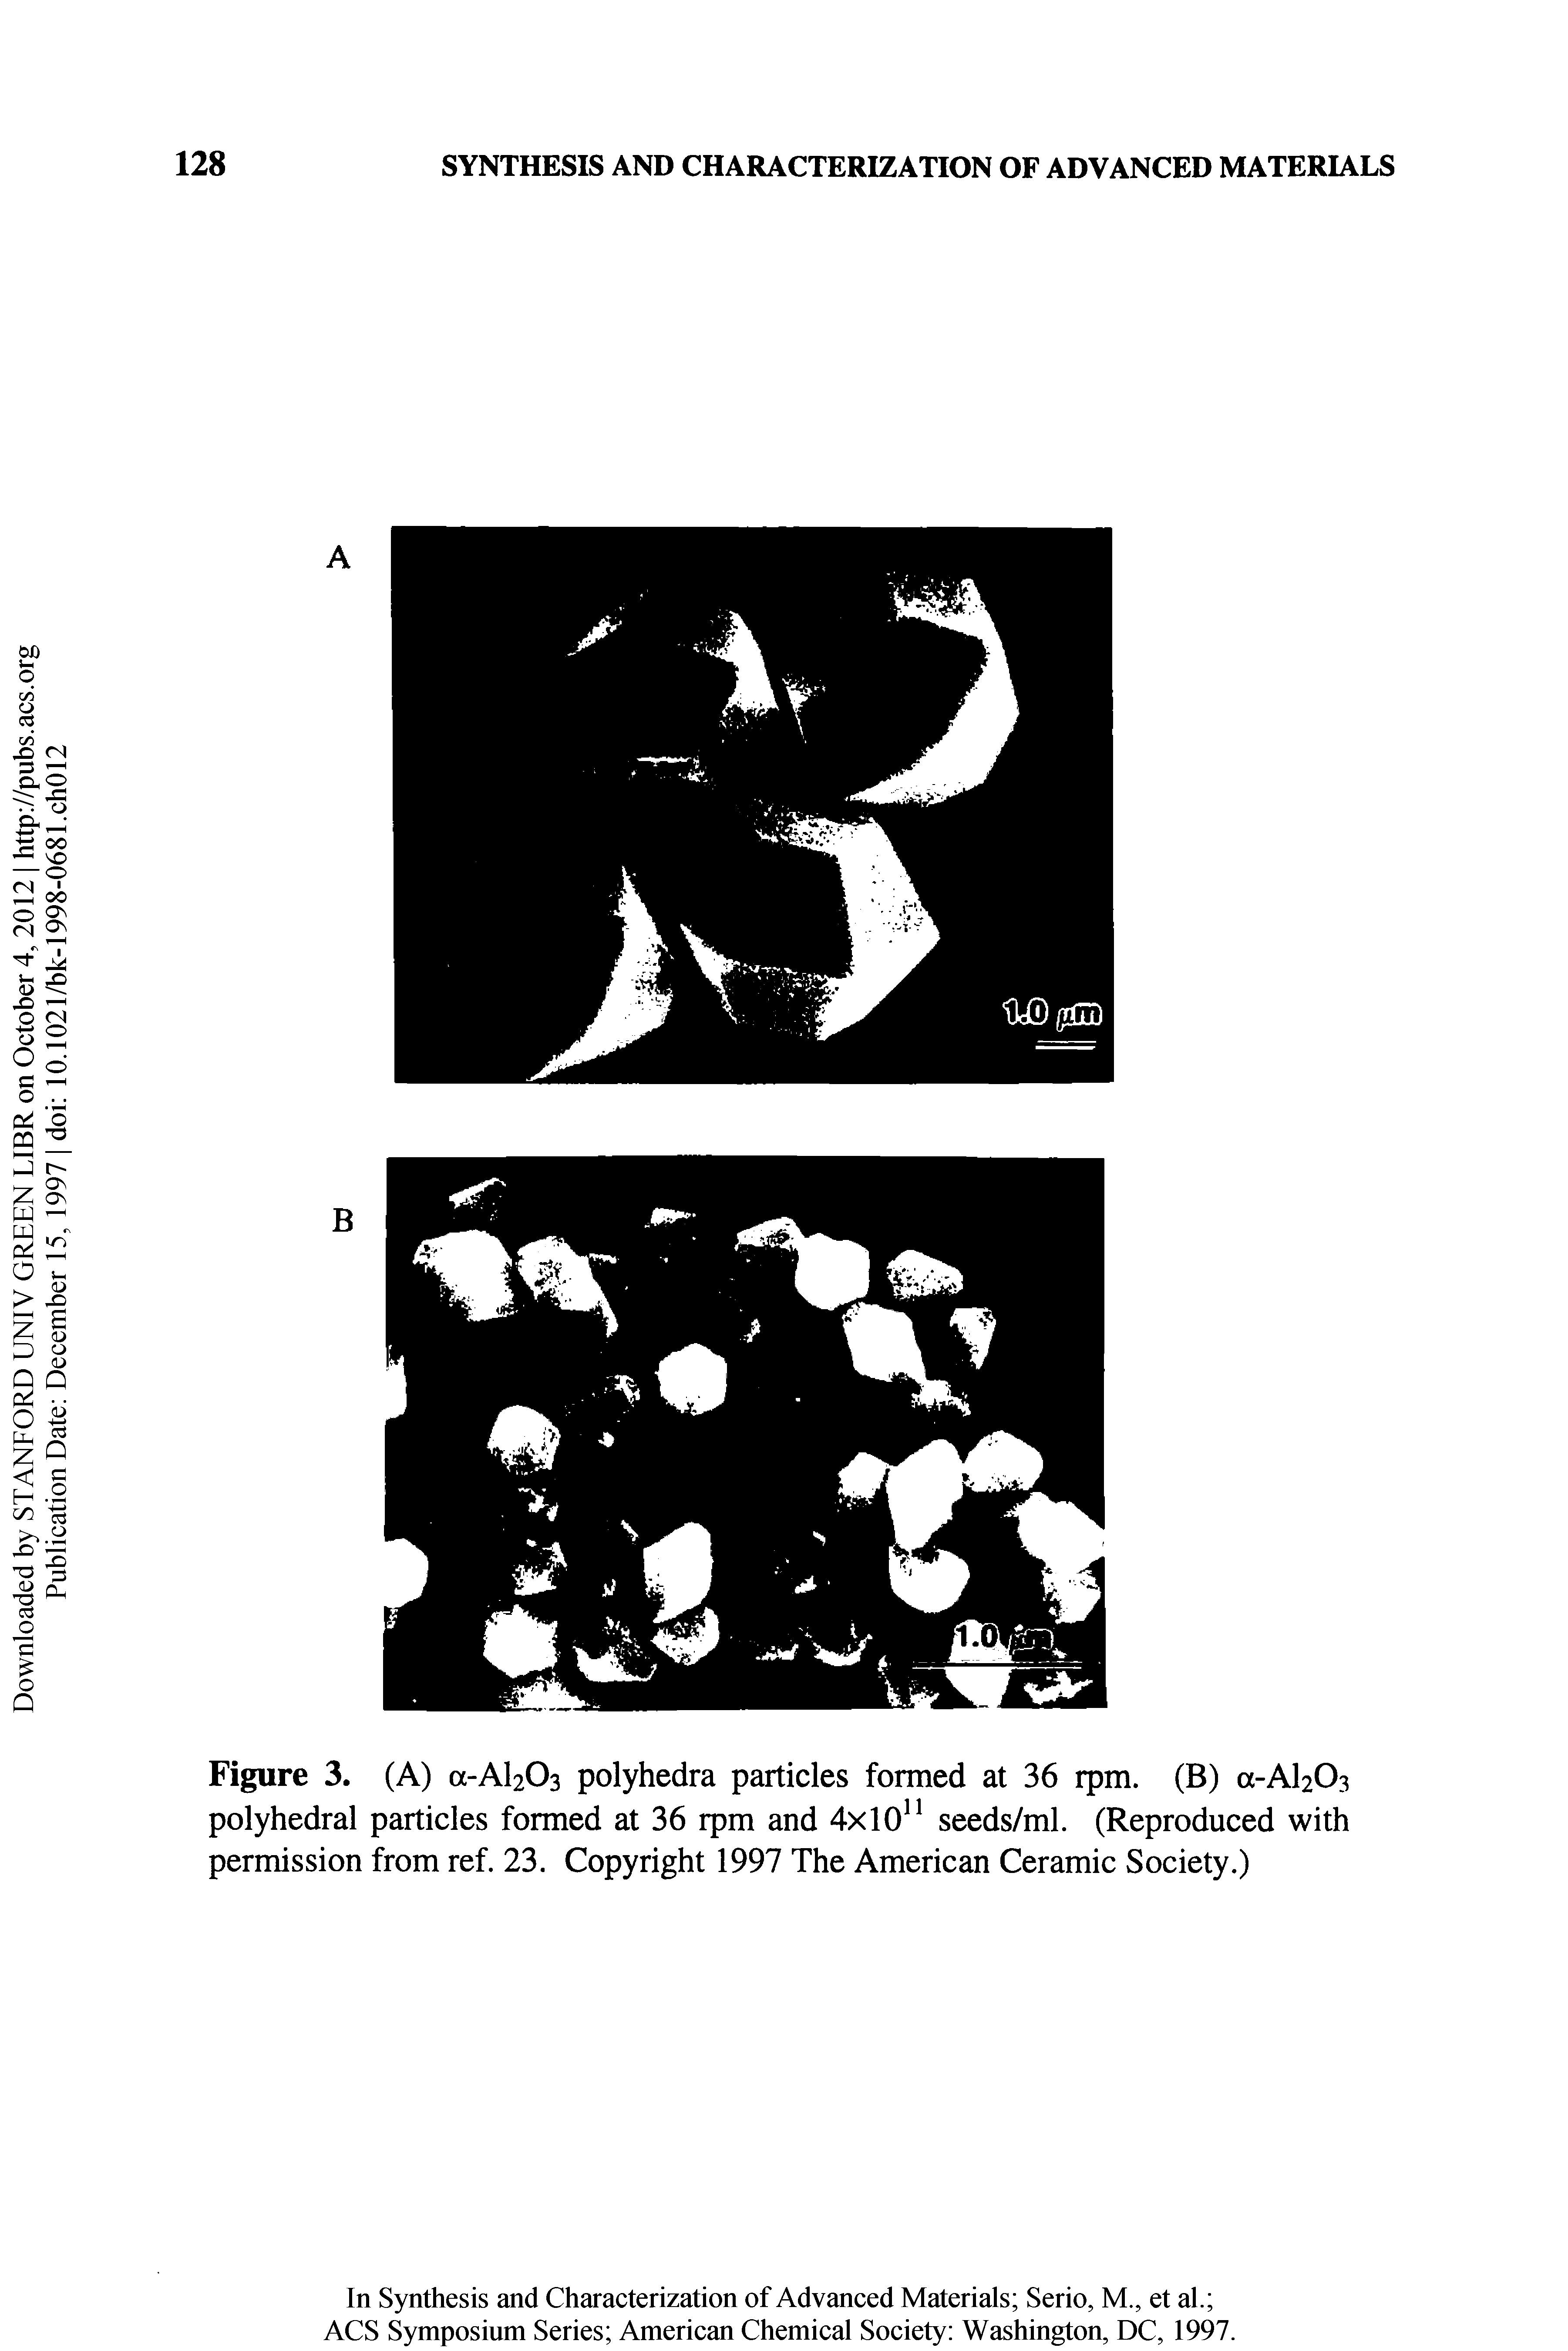 Figure 3. (A) a-A Oa polyhedra particles formed at 36 ipm. (B) a-A Oa polyhedral particles formed at 36 rpm and 4x10 seeds/ml. (Reproduced with permission from ref. 23. Copyright 1997 The American Ceramic Society.)...